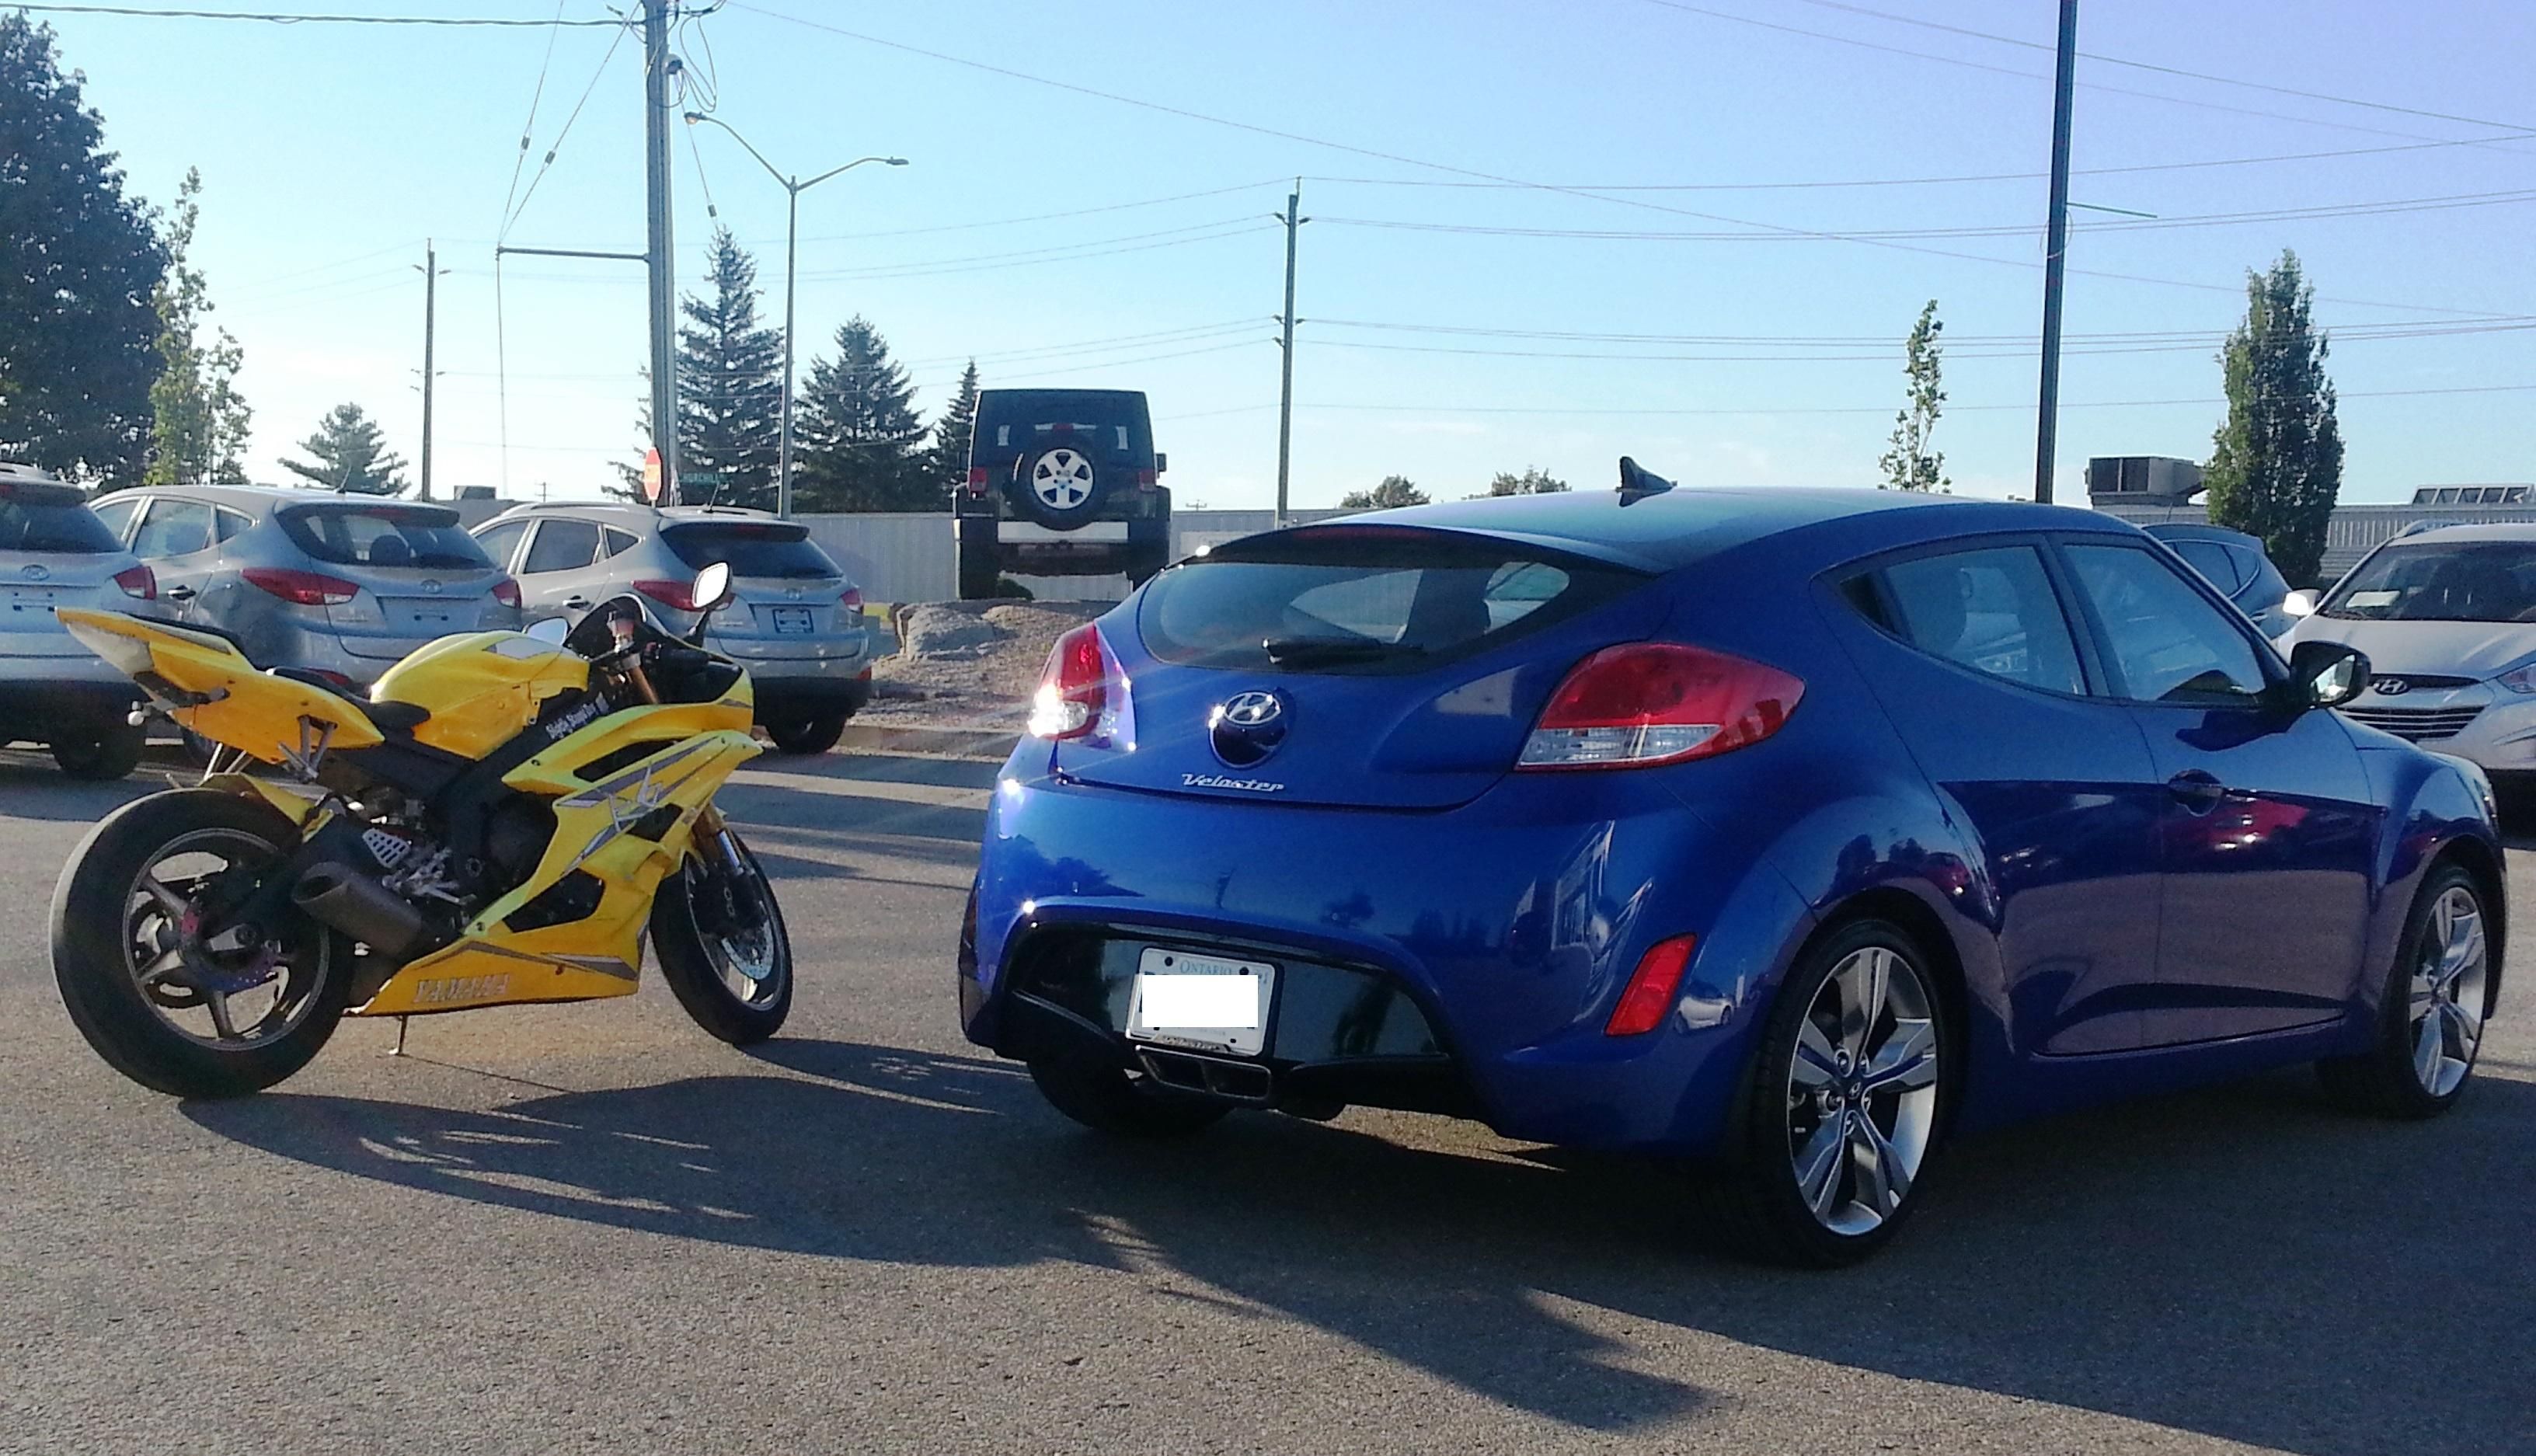 D-Day: Rear views of my (former) Yamaha R6 and the Hyundai Veloster